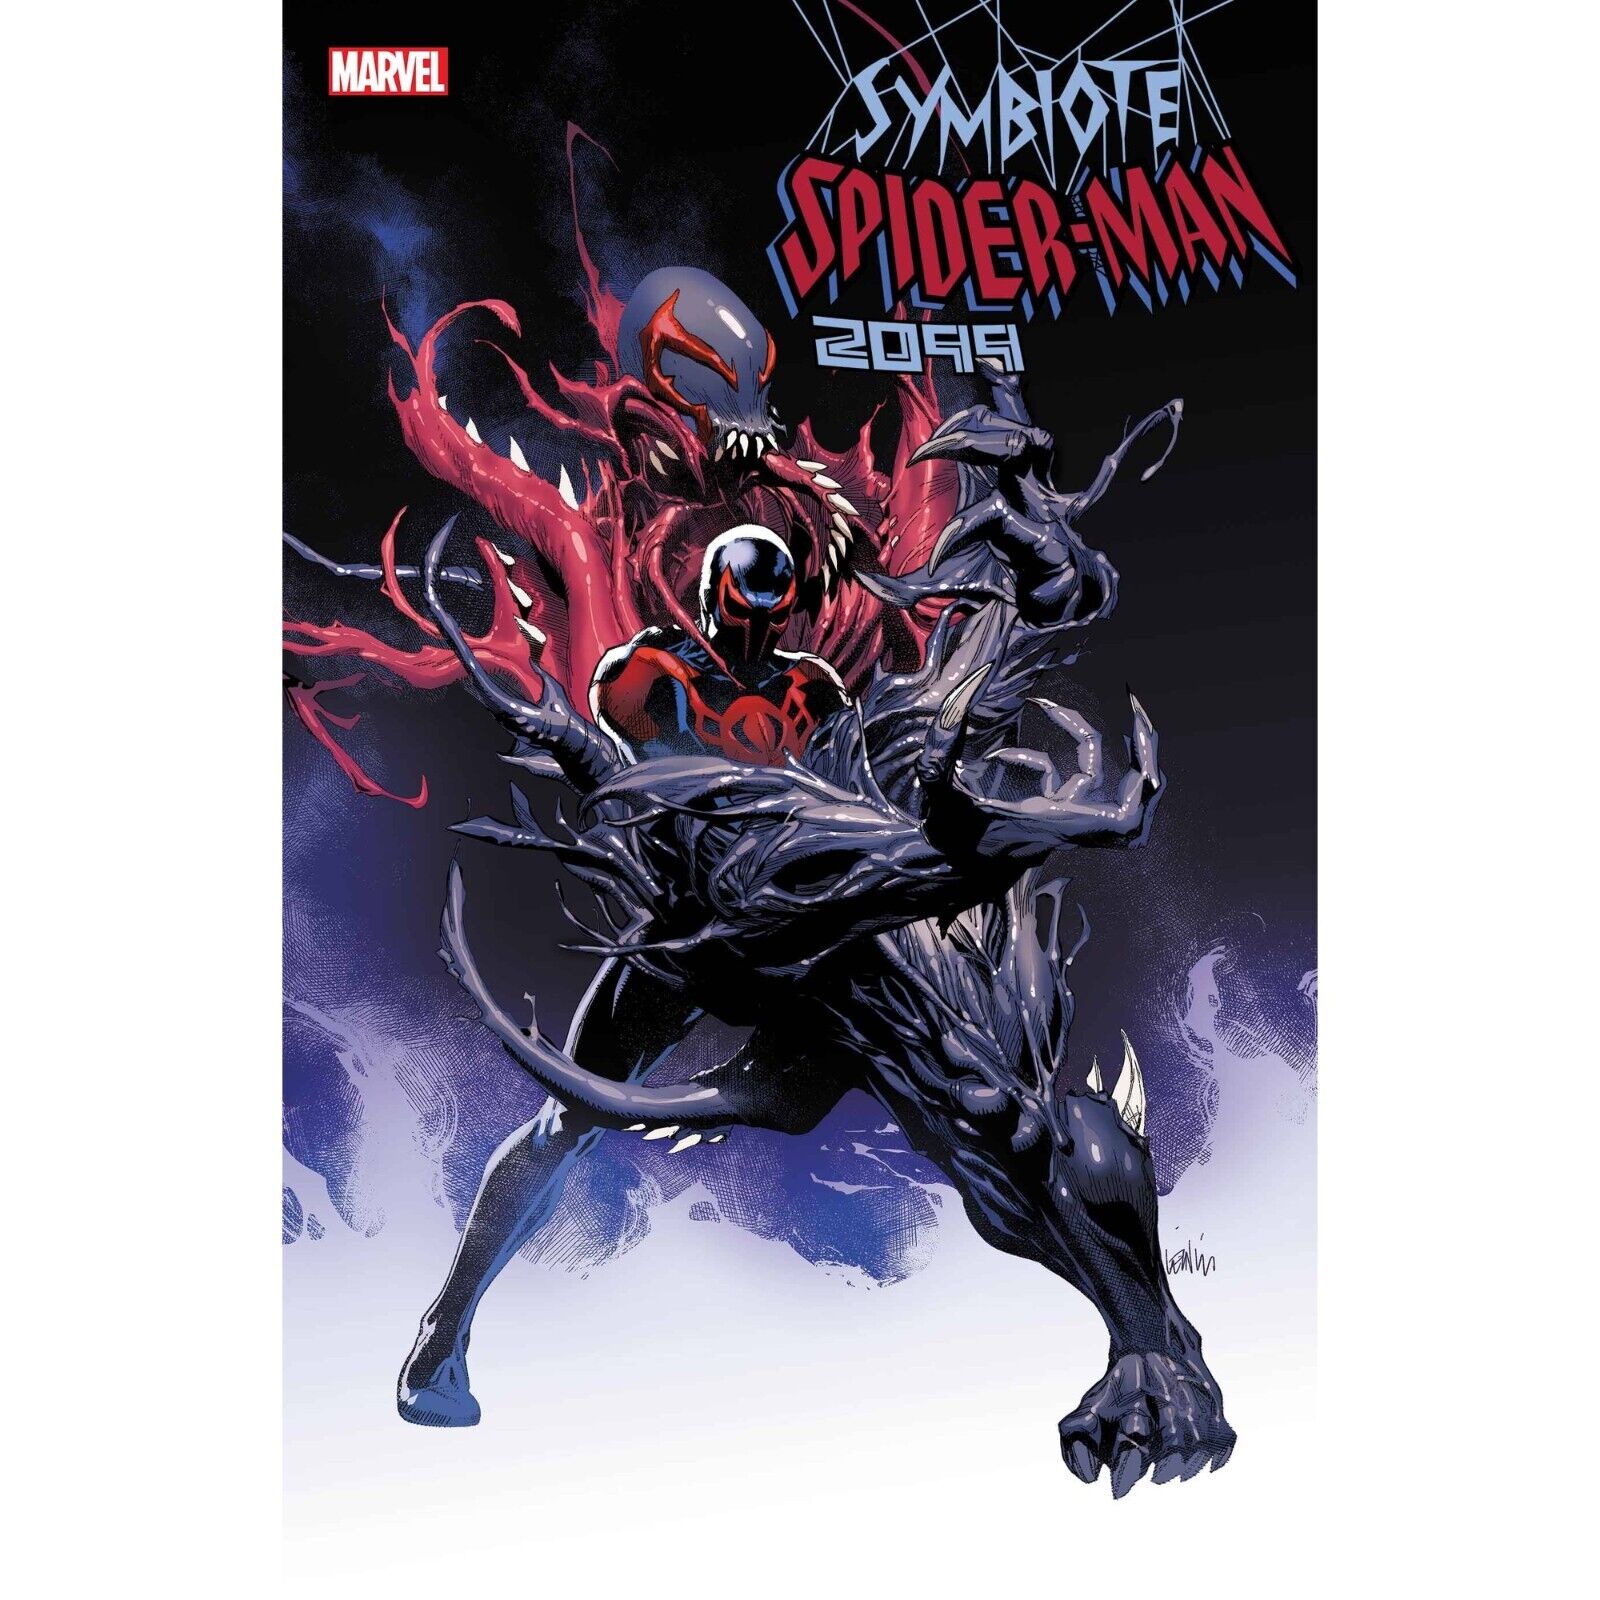 Symbiote Spider-Man 2099 (2024) 1 2 Variants | Marvel Comics | COVER SELECT